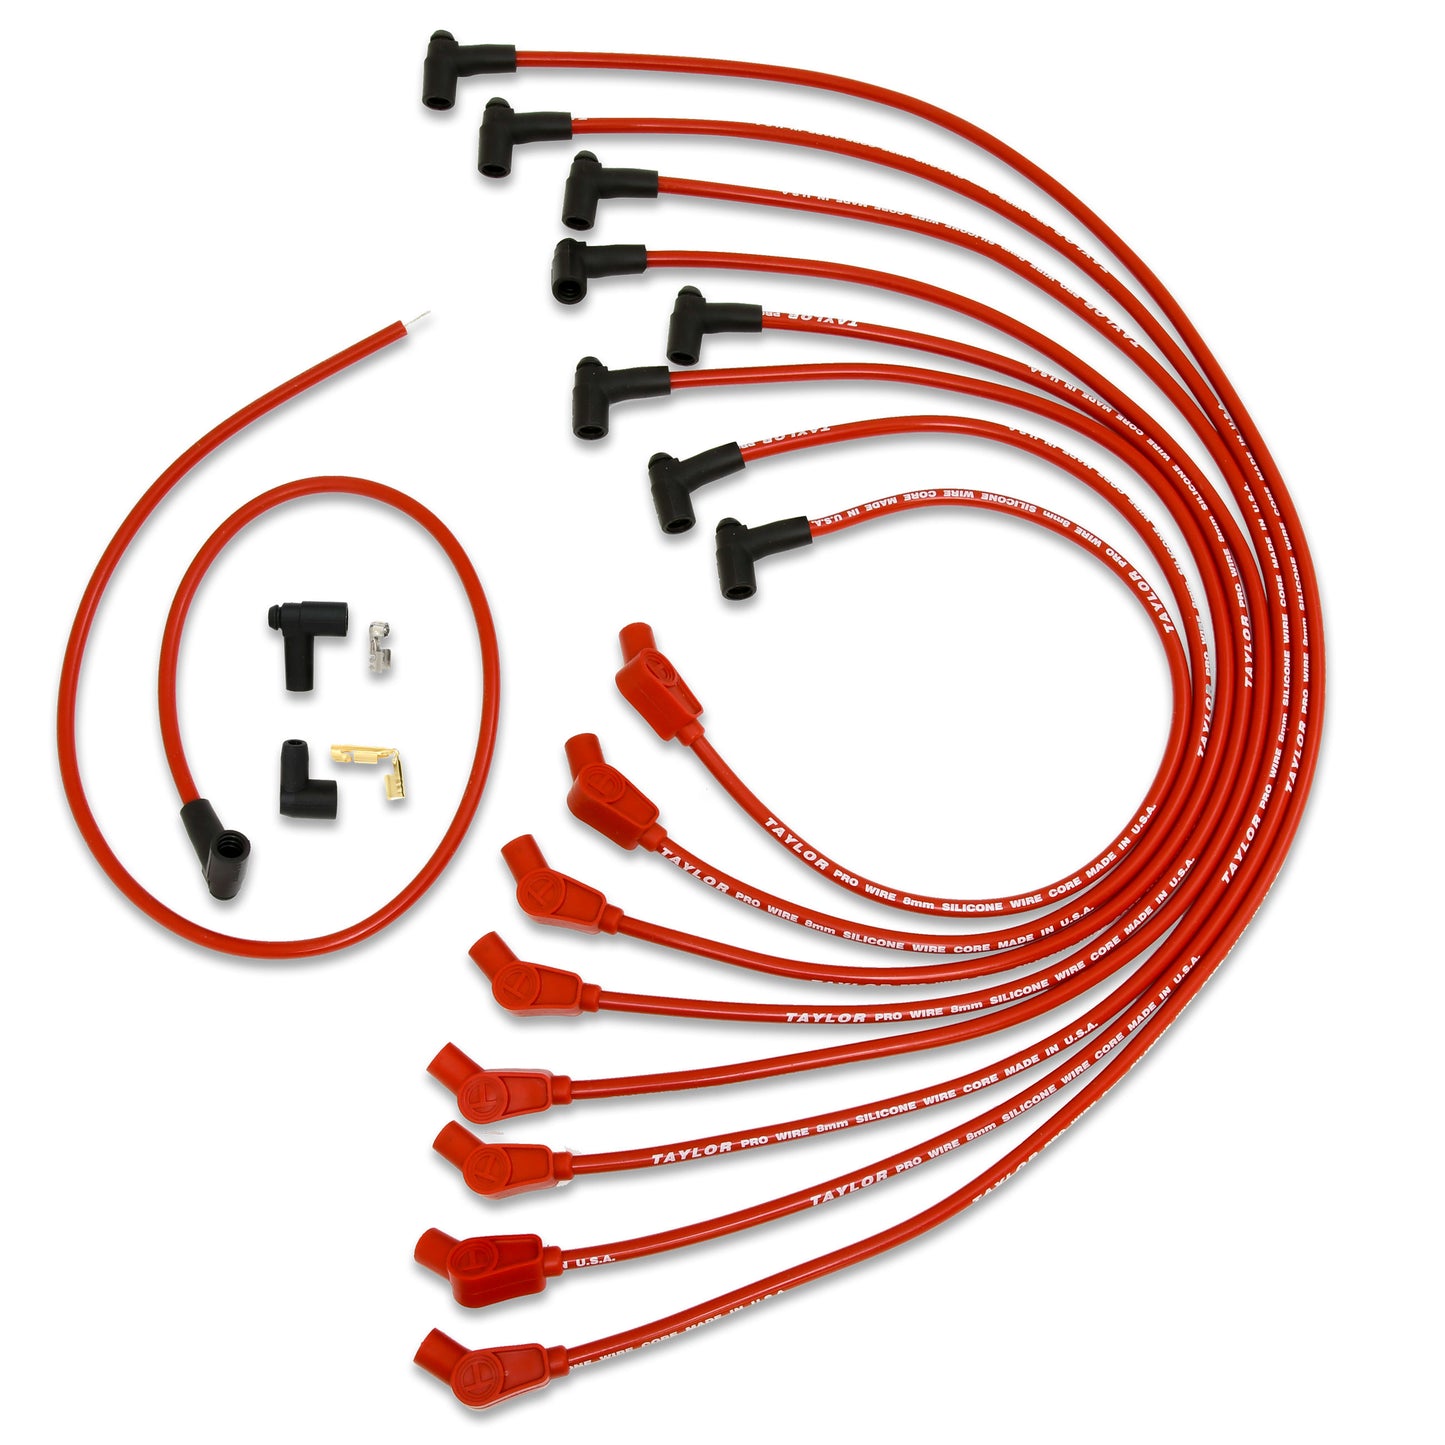 Taylor Cable 76242 8mm Spiro Pro Race Fit Spark Plug TCW Wires 135° Red